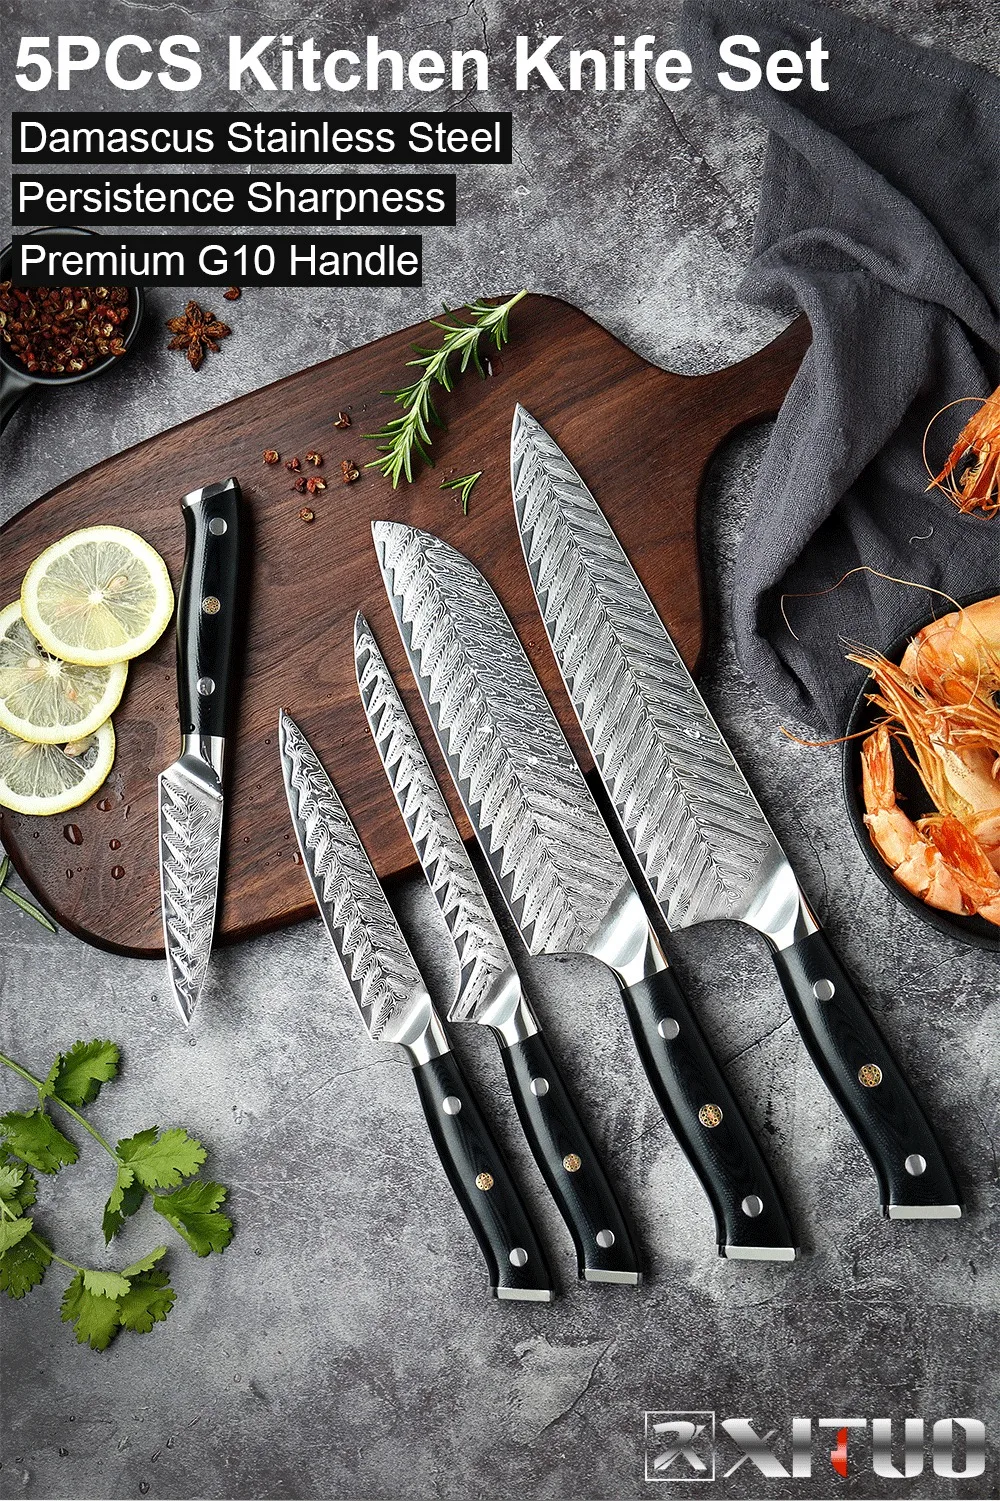 Xituo damascus chef knife vg10 professional kitchen knife cleaver cooking tool exquisite plum rivet g10 handle with knives cover